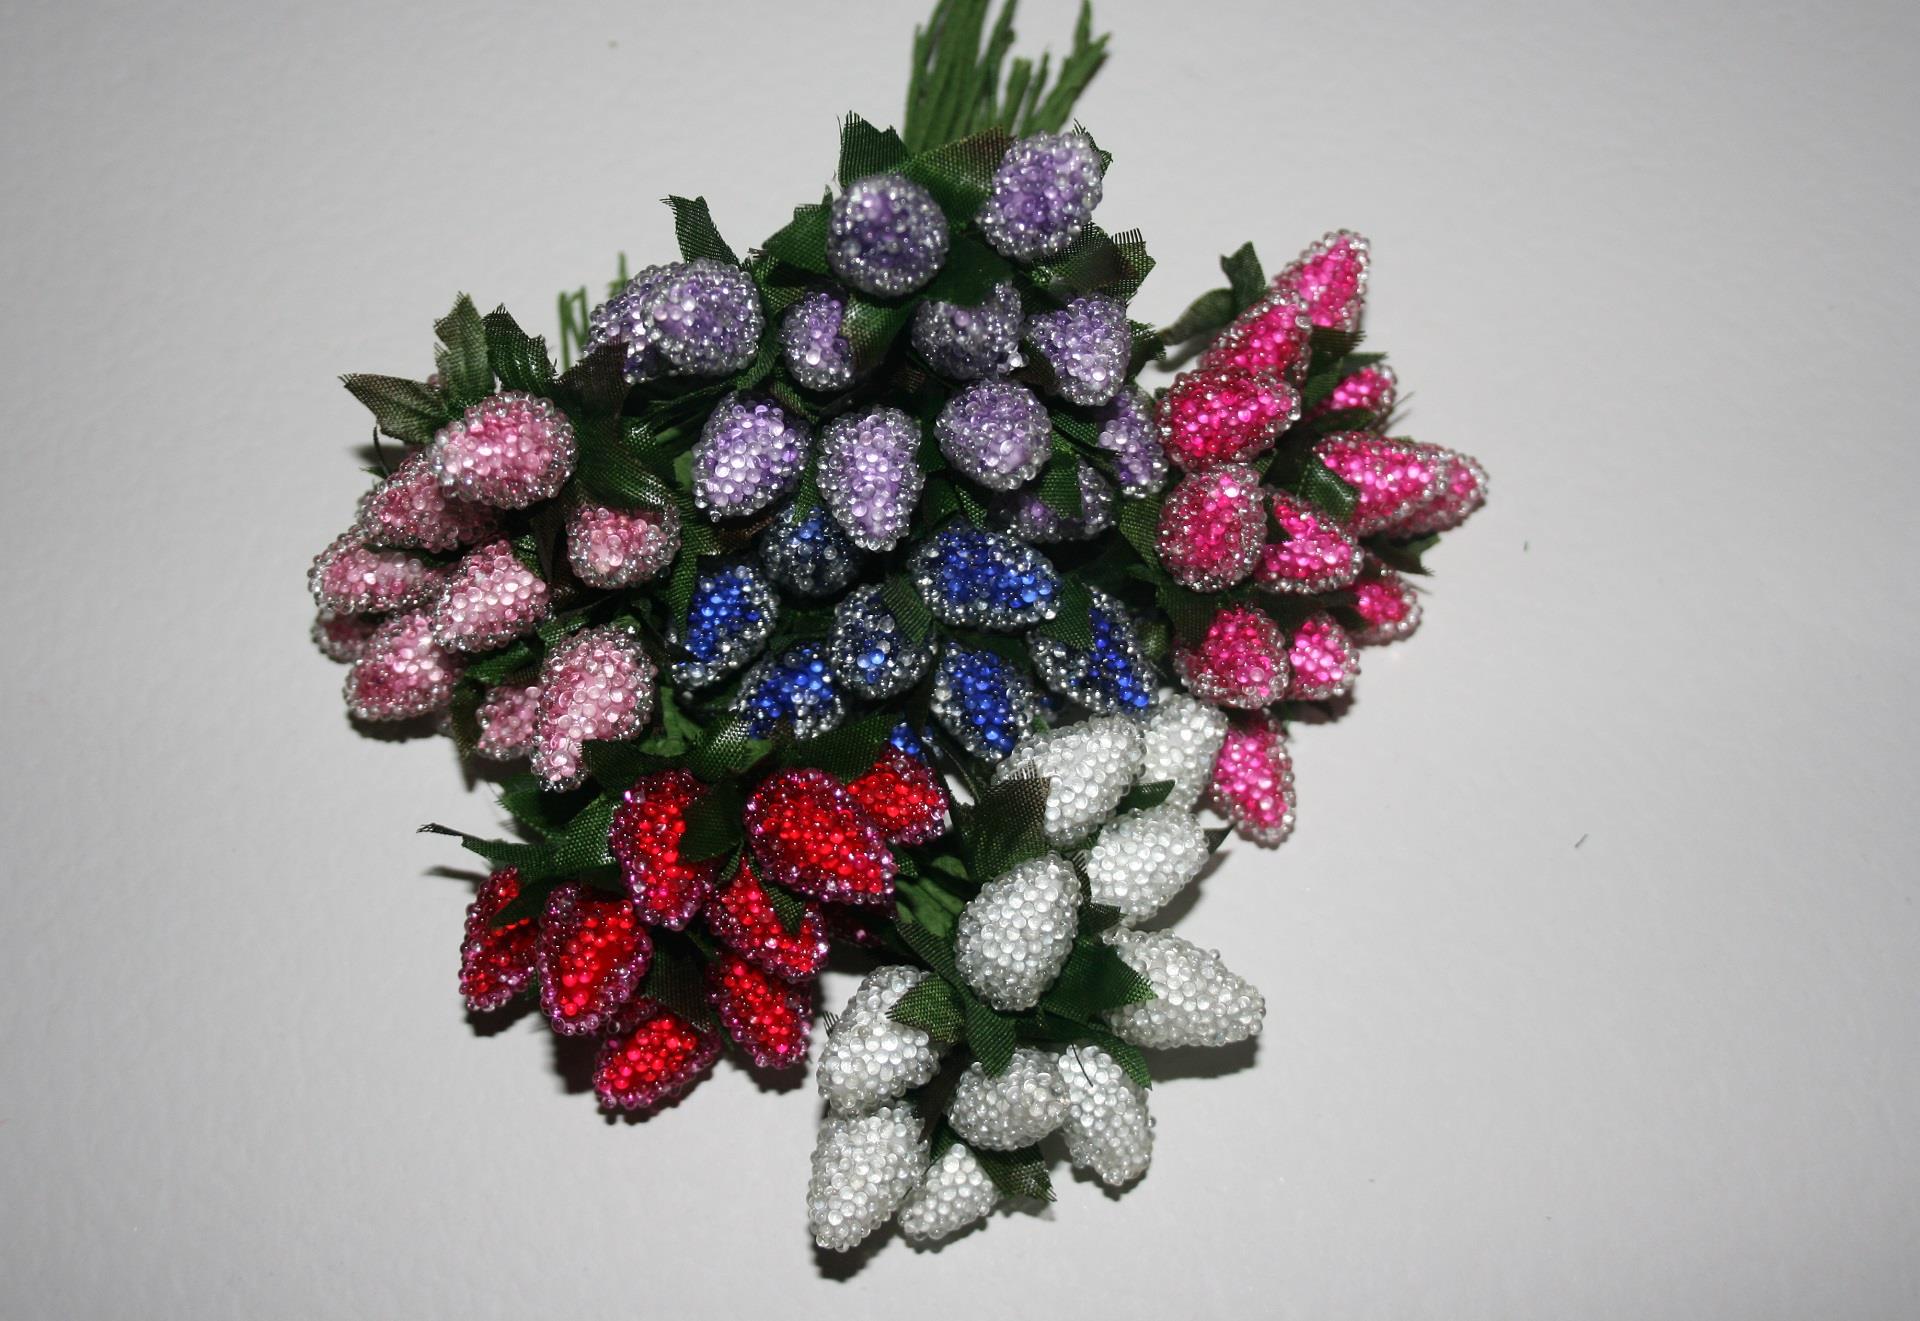 Bunch of Beaded Berries With Leaves & Stems- 5 Colour Choices - Photo 1/1